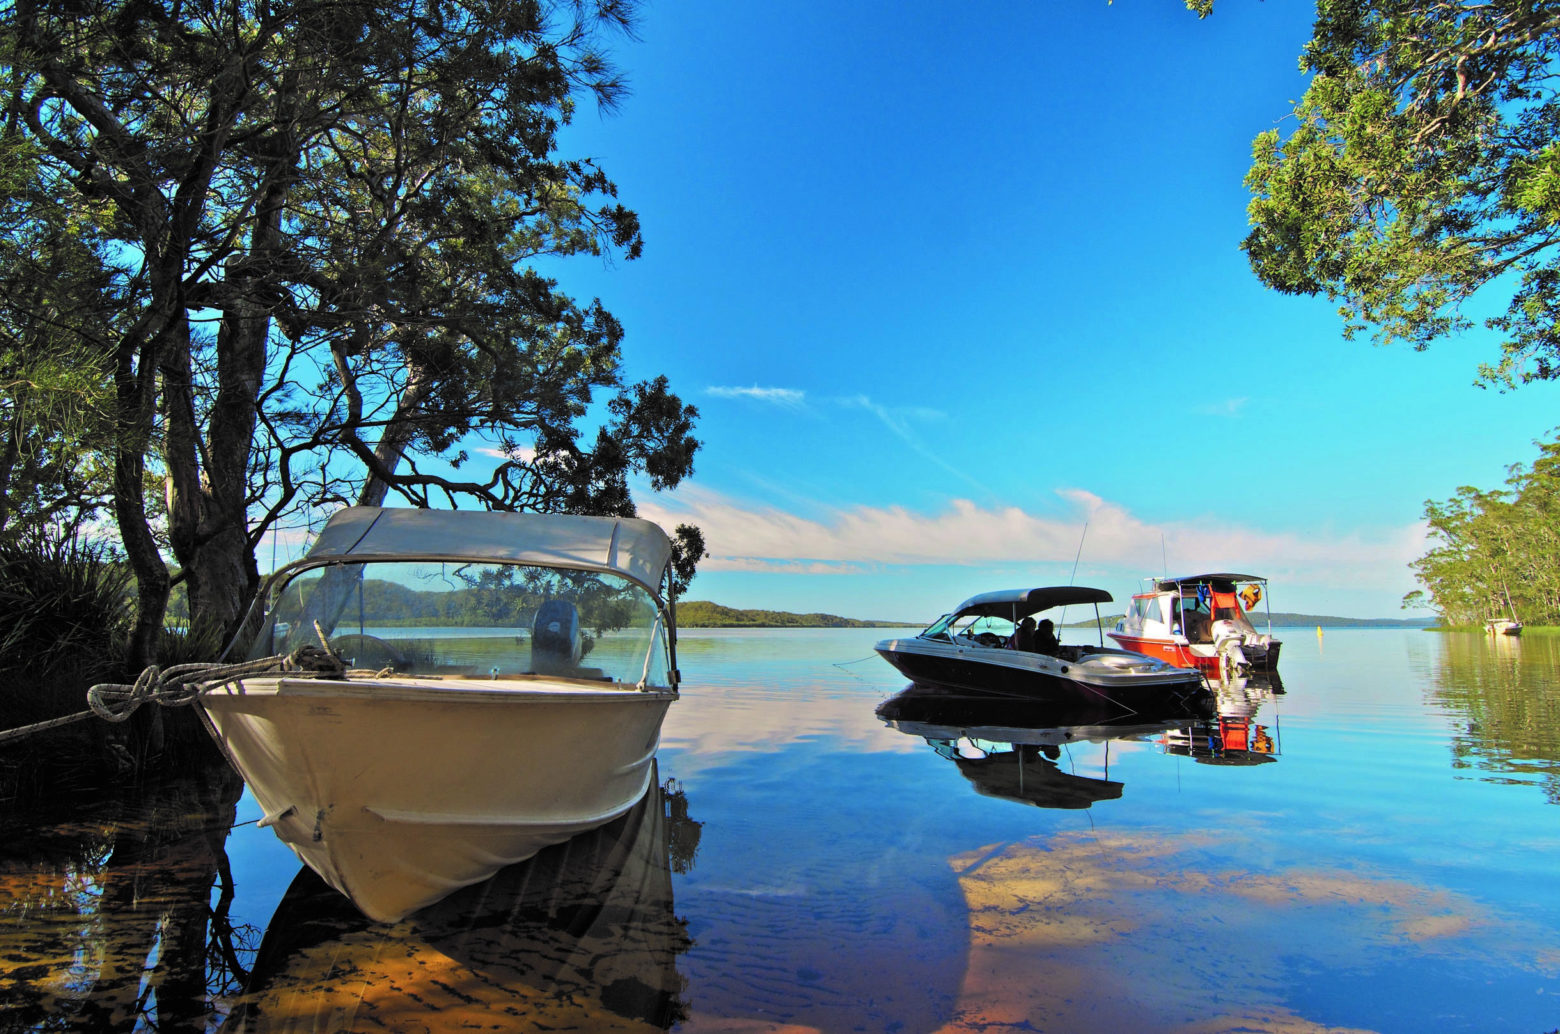 Neranie in Myall Lakes National Park